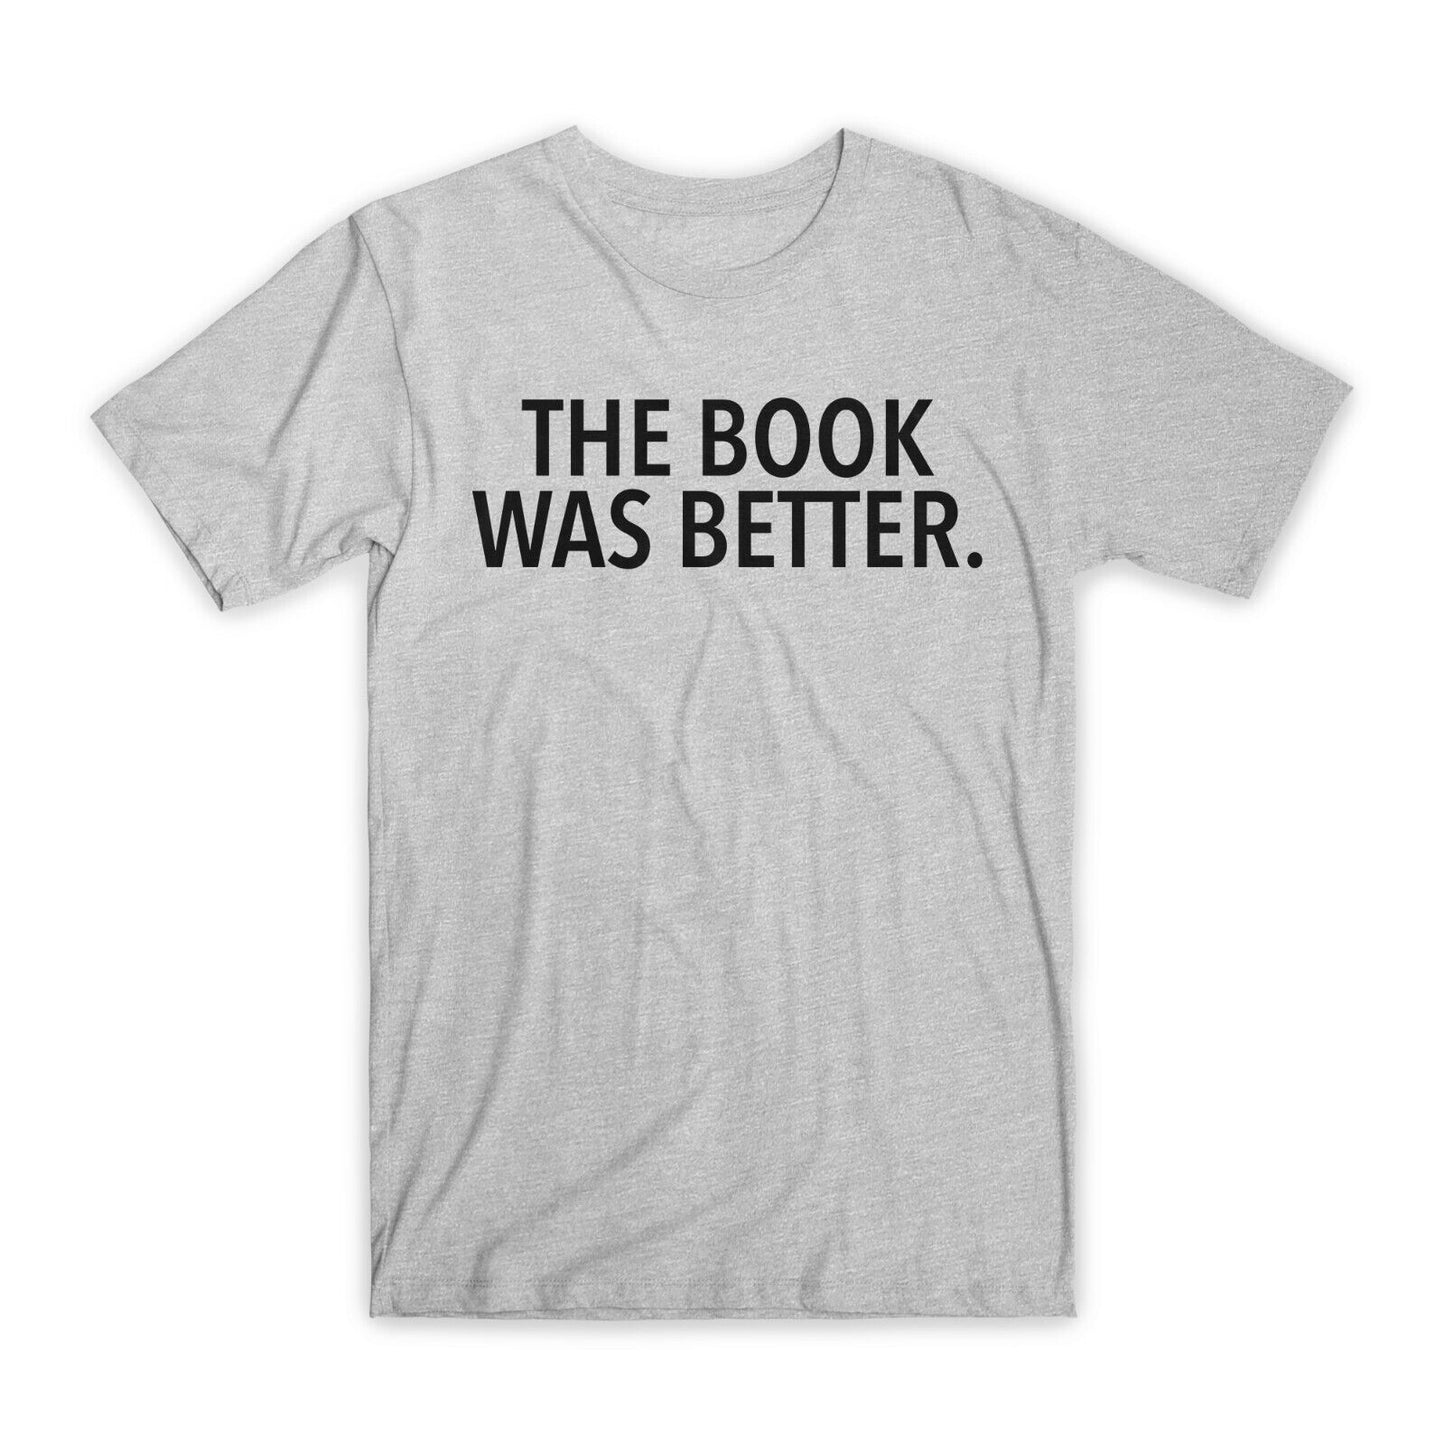 The Book Was Better T-Shirt Premium Soft Cotton Crew Neck Funny Tees Gifts NEW